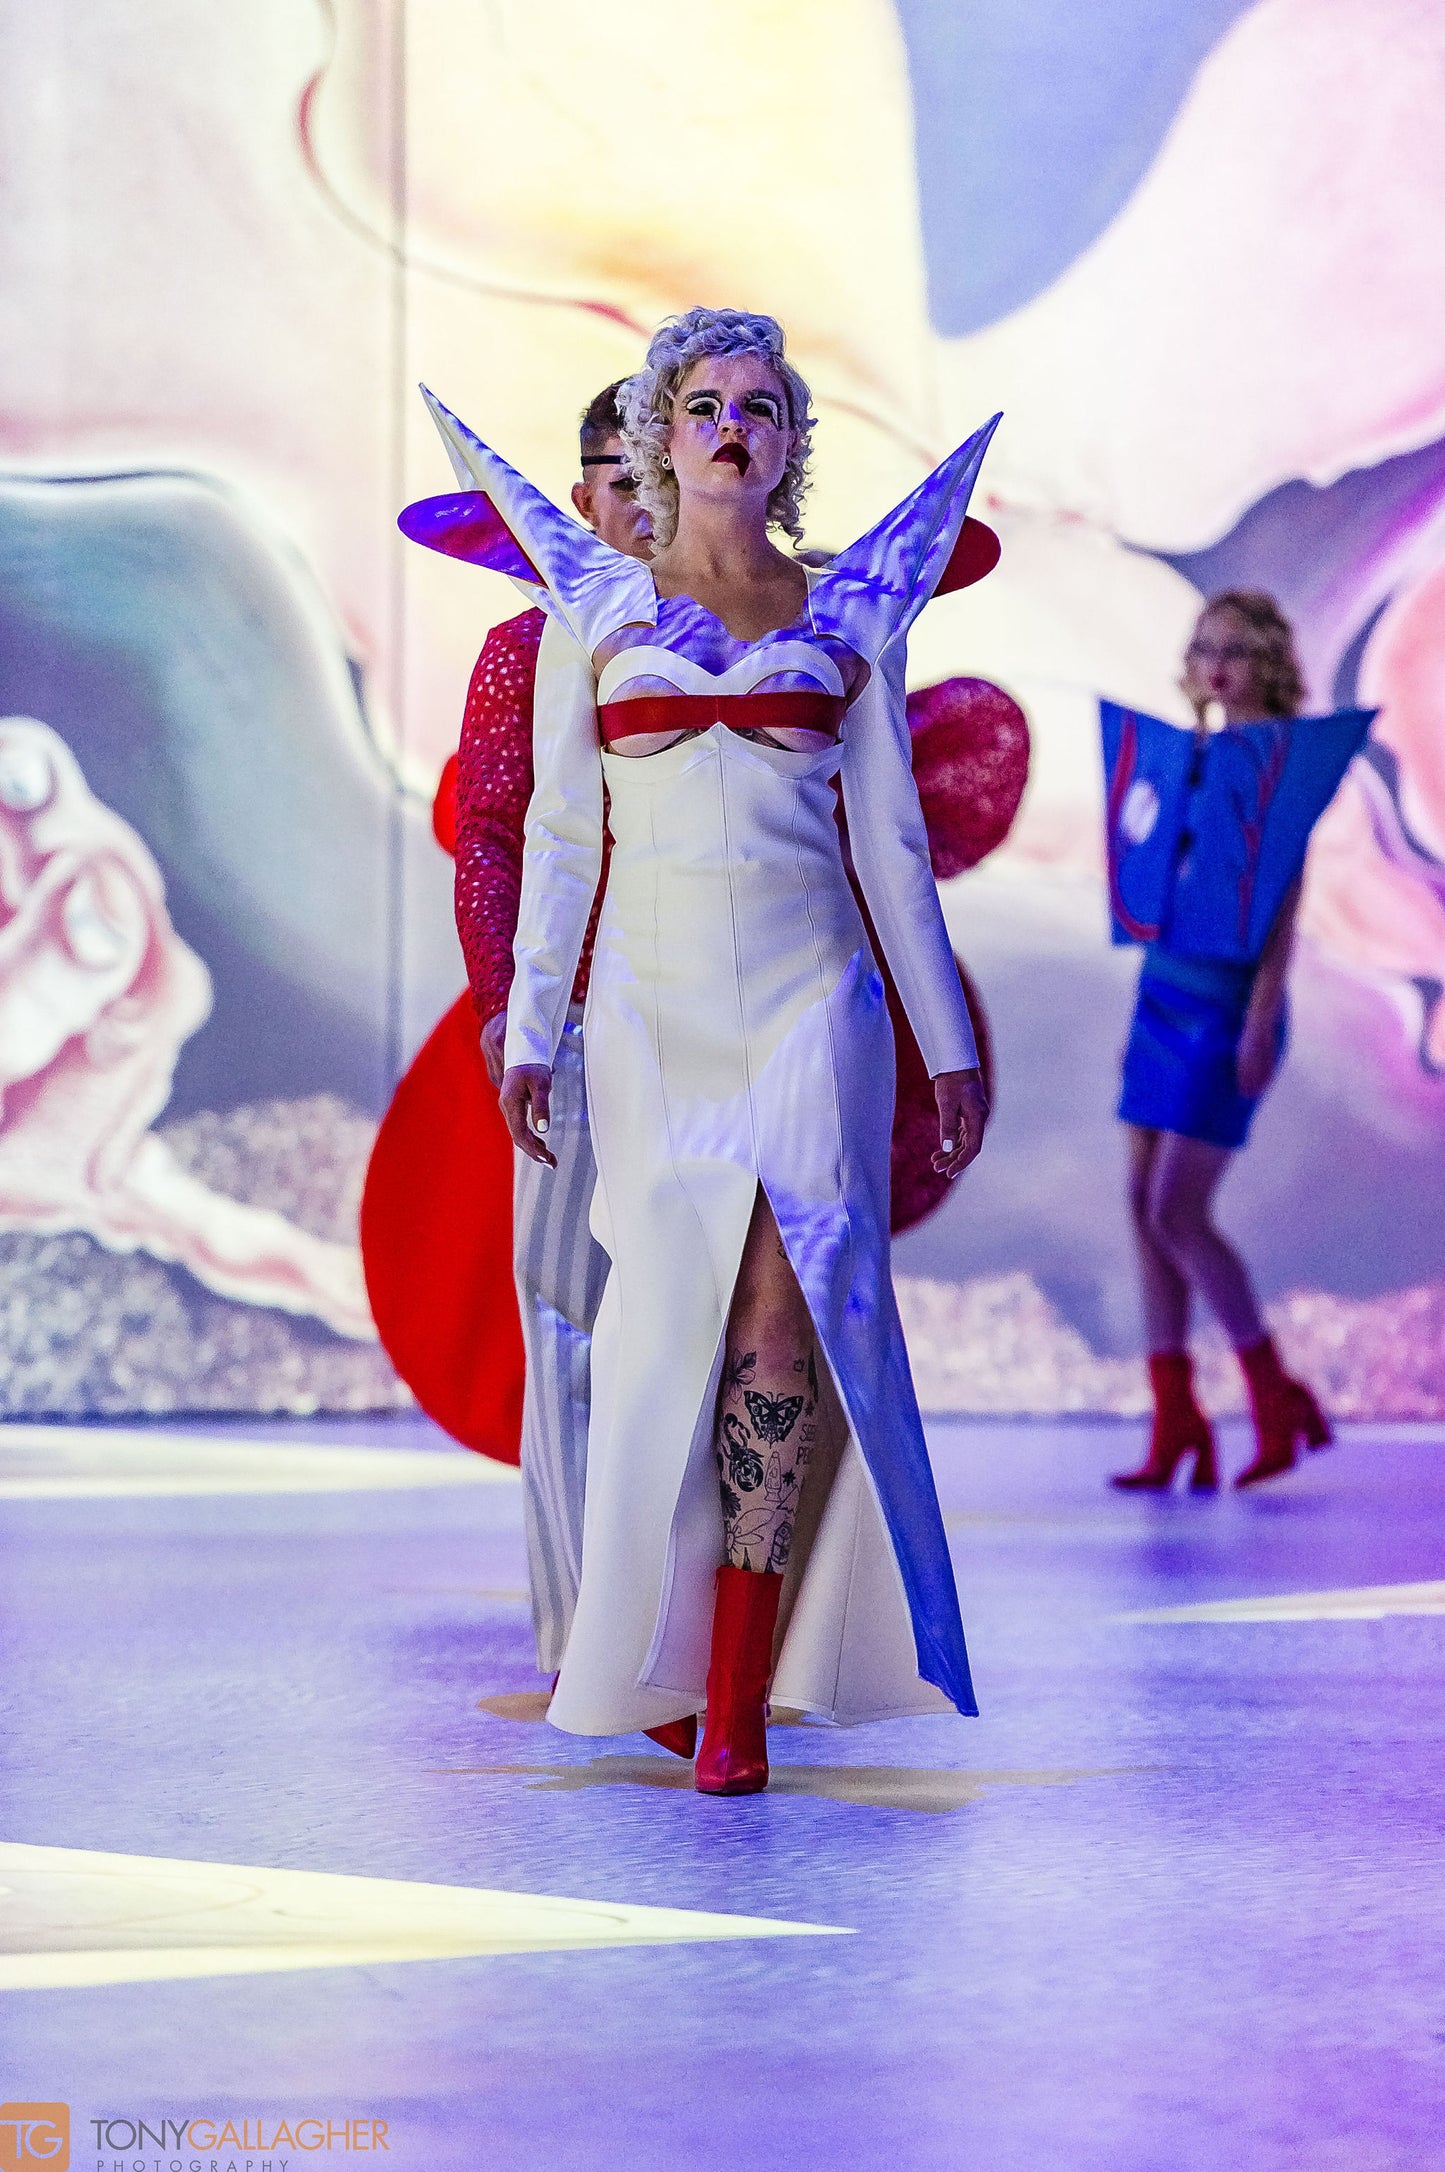 Dali Collection: The Rian White Vinyl Apocalyptic Mermaid Dress with Crop Jacket